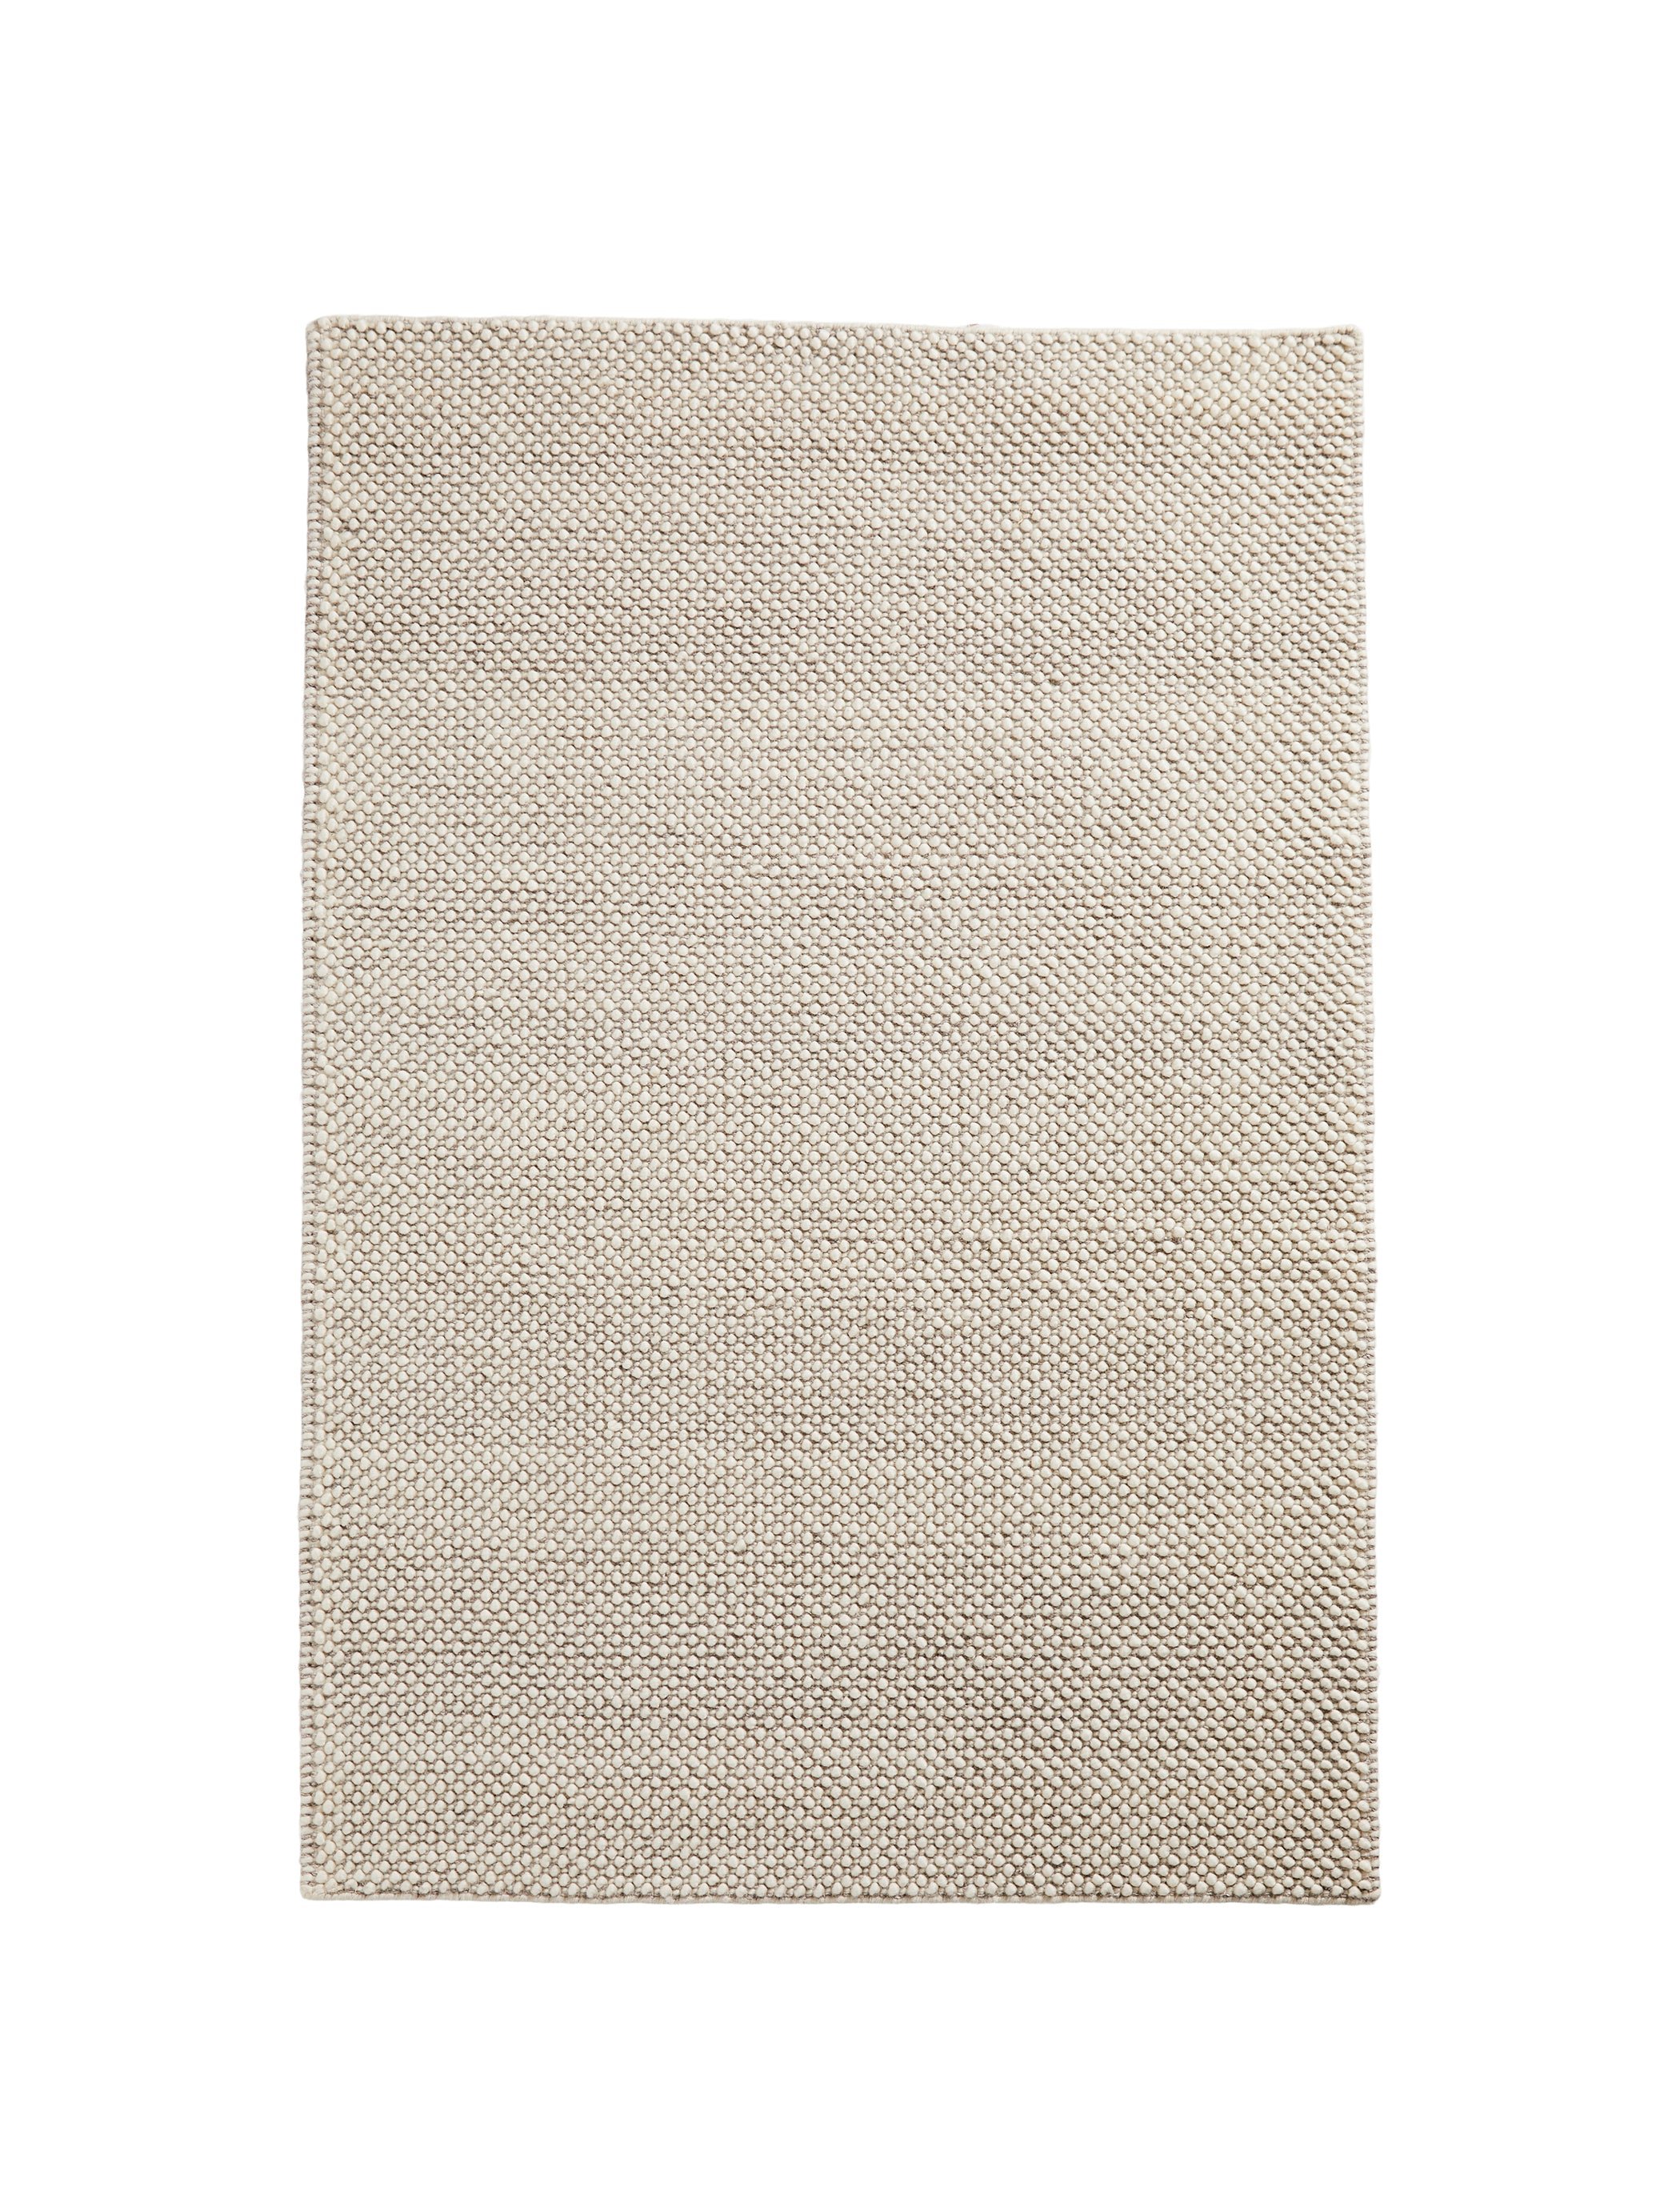 Tact Rug - 118inL x 78inW / Off-White